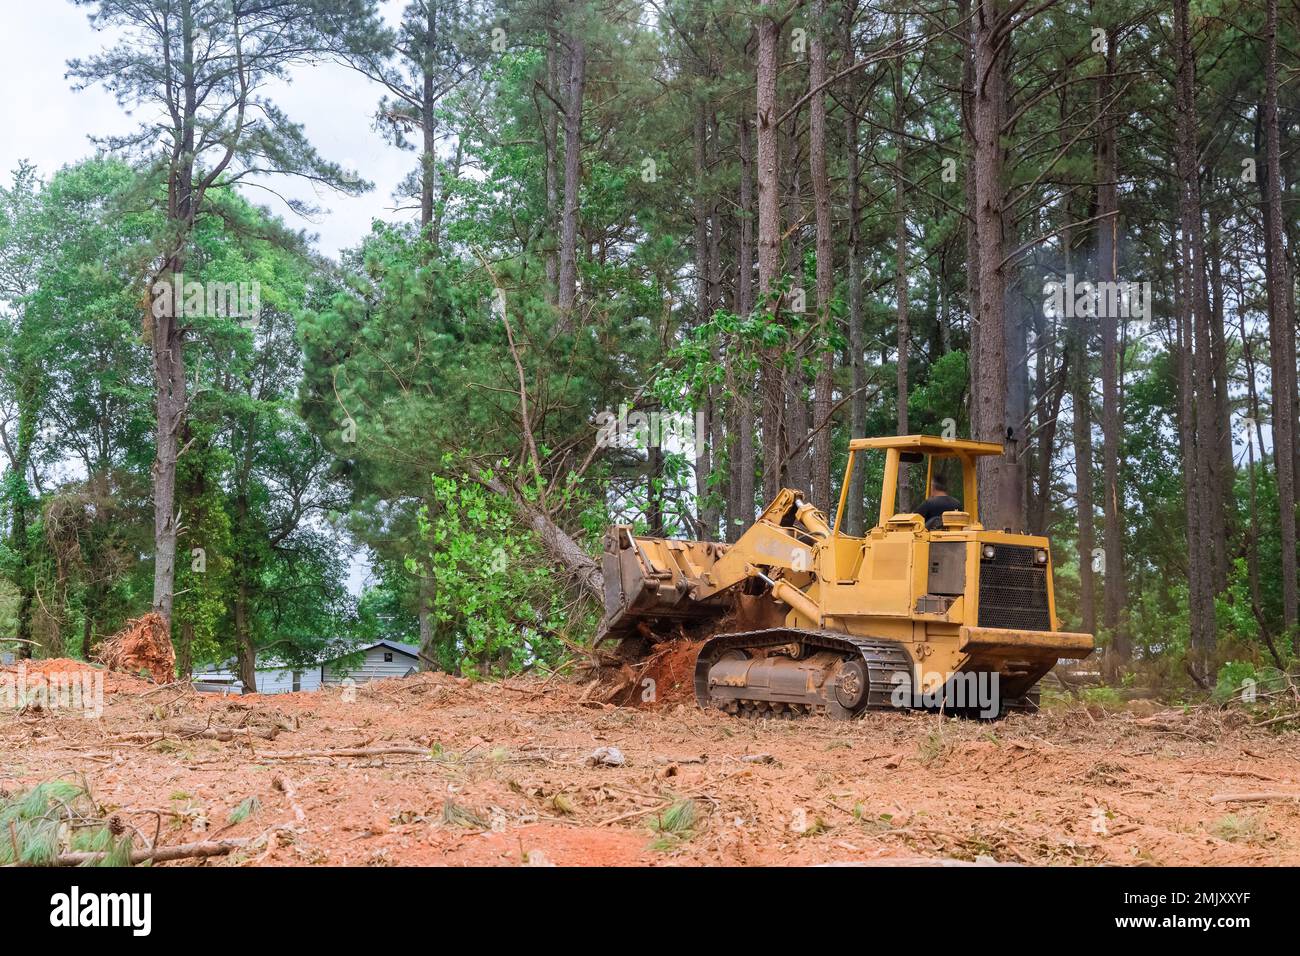 Contractor used tractor skid steers to remove trees from property during construction process in order prepare land for subdivision development. Stock Photo